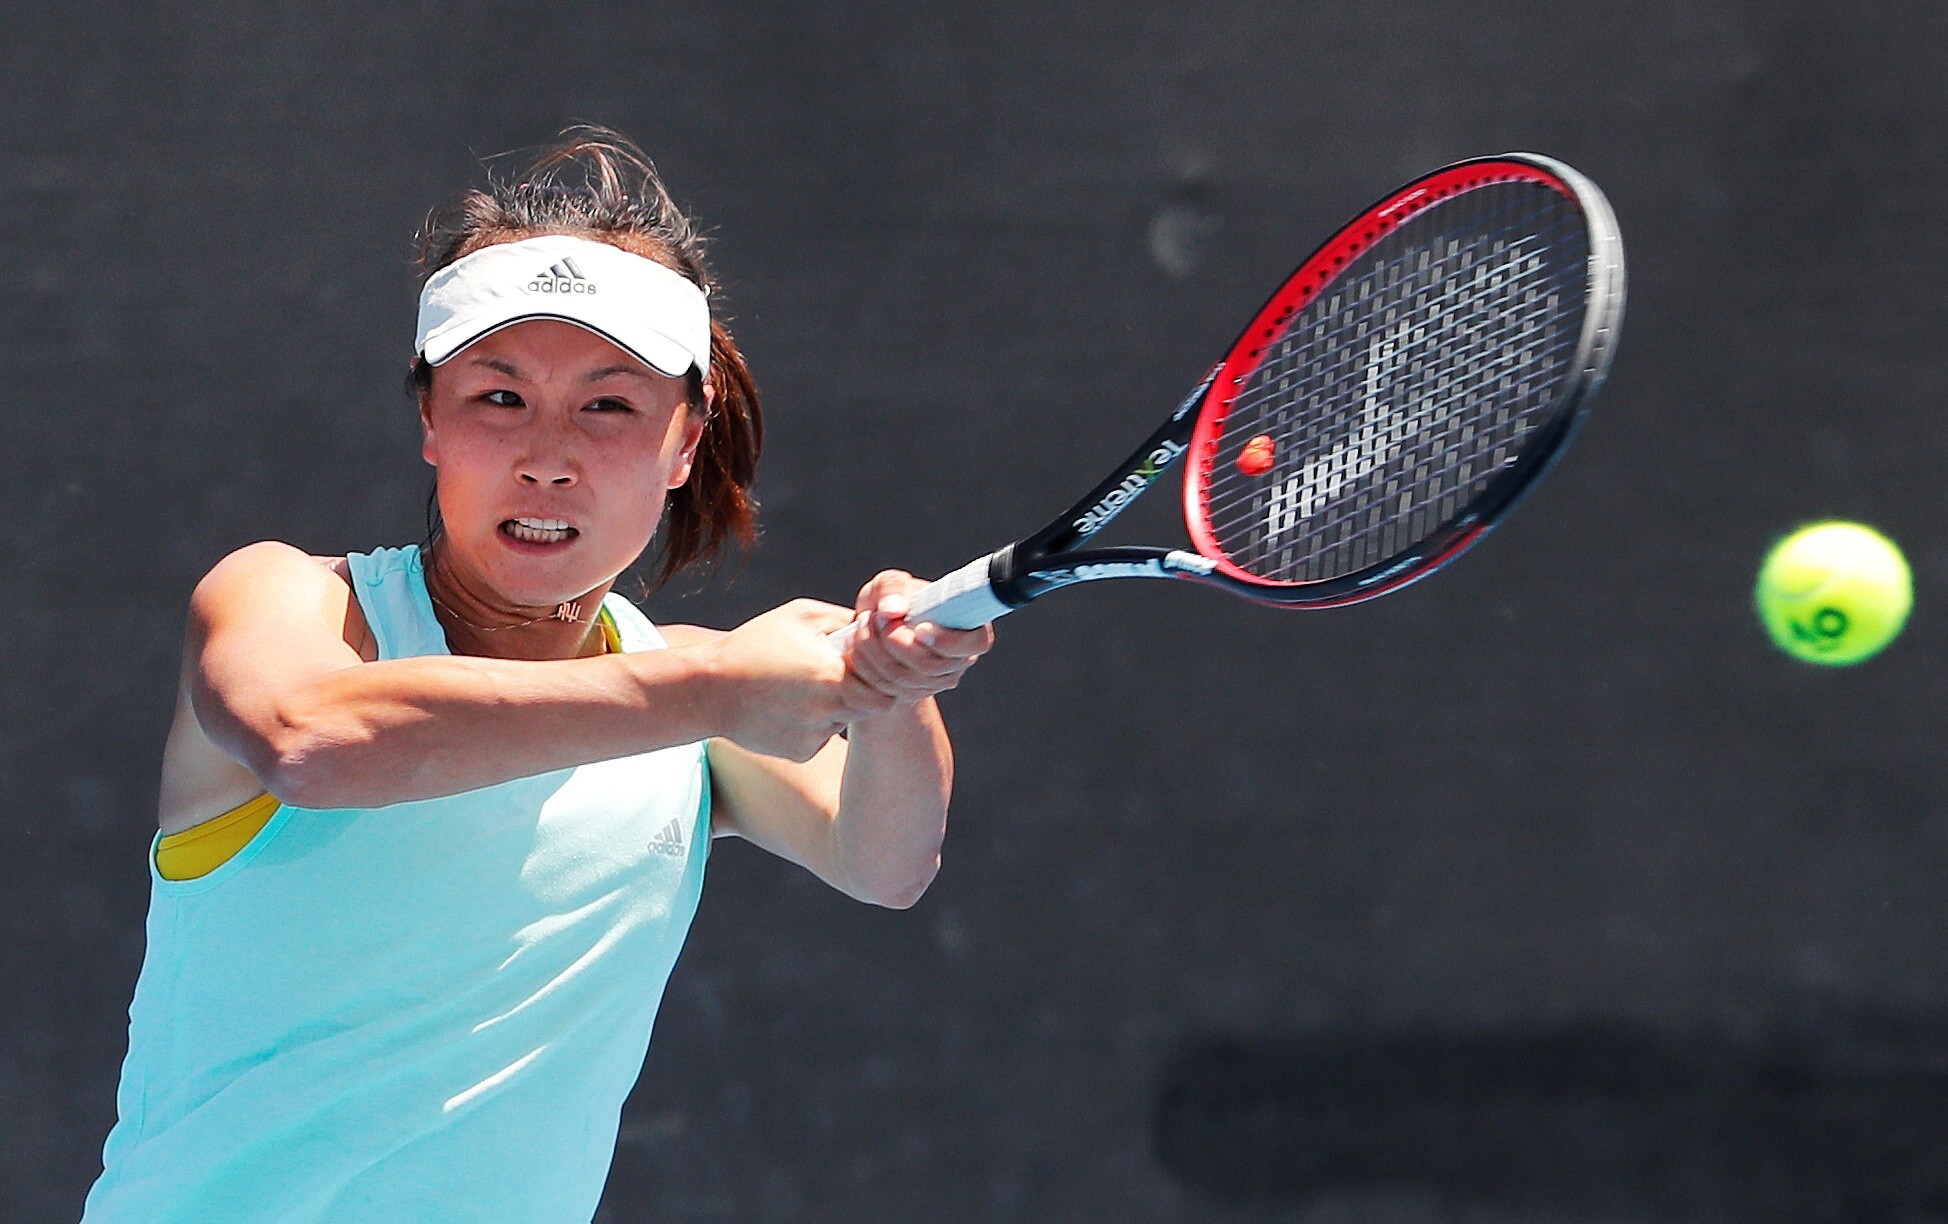 China’s Peng Shuai practises at the Australian Open at Melbourne Park, Melbourne, Australia in January 2019. Photo: Reuters